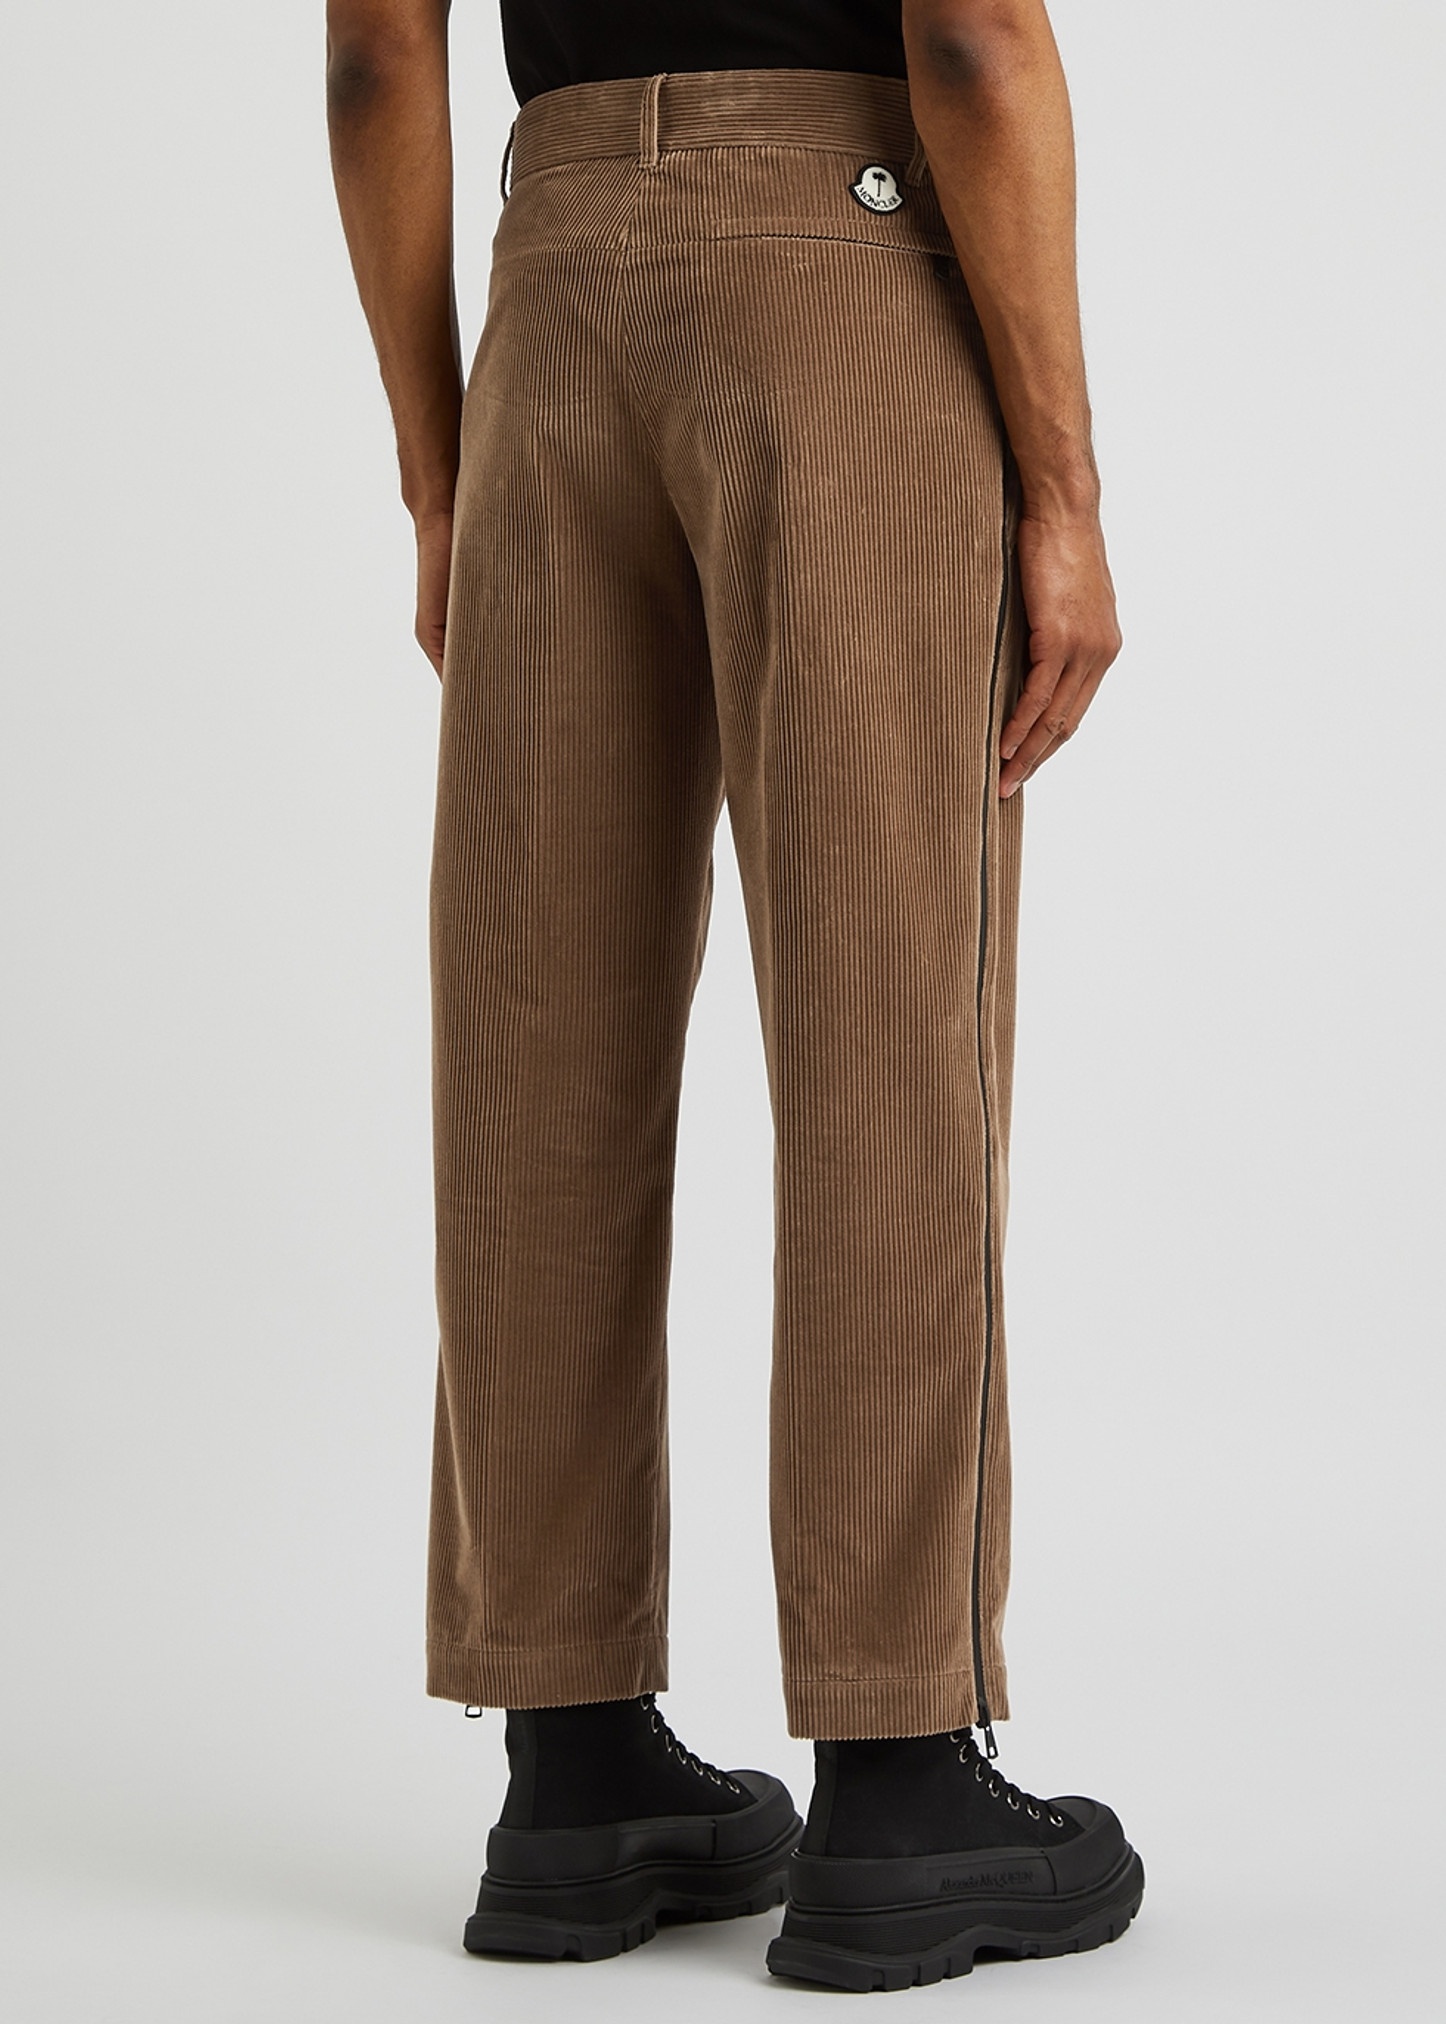 8 Moncler Palm Angels brown corduroy trousers - 3